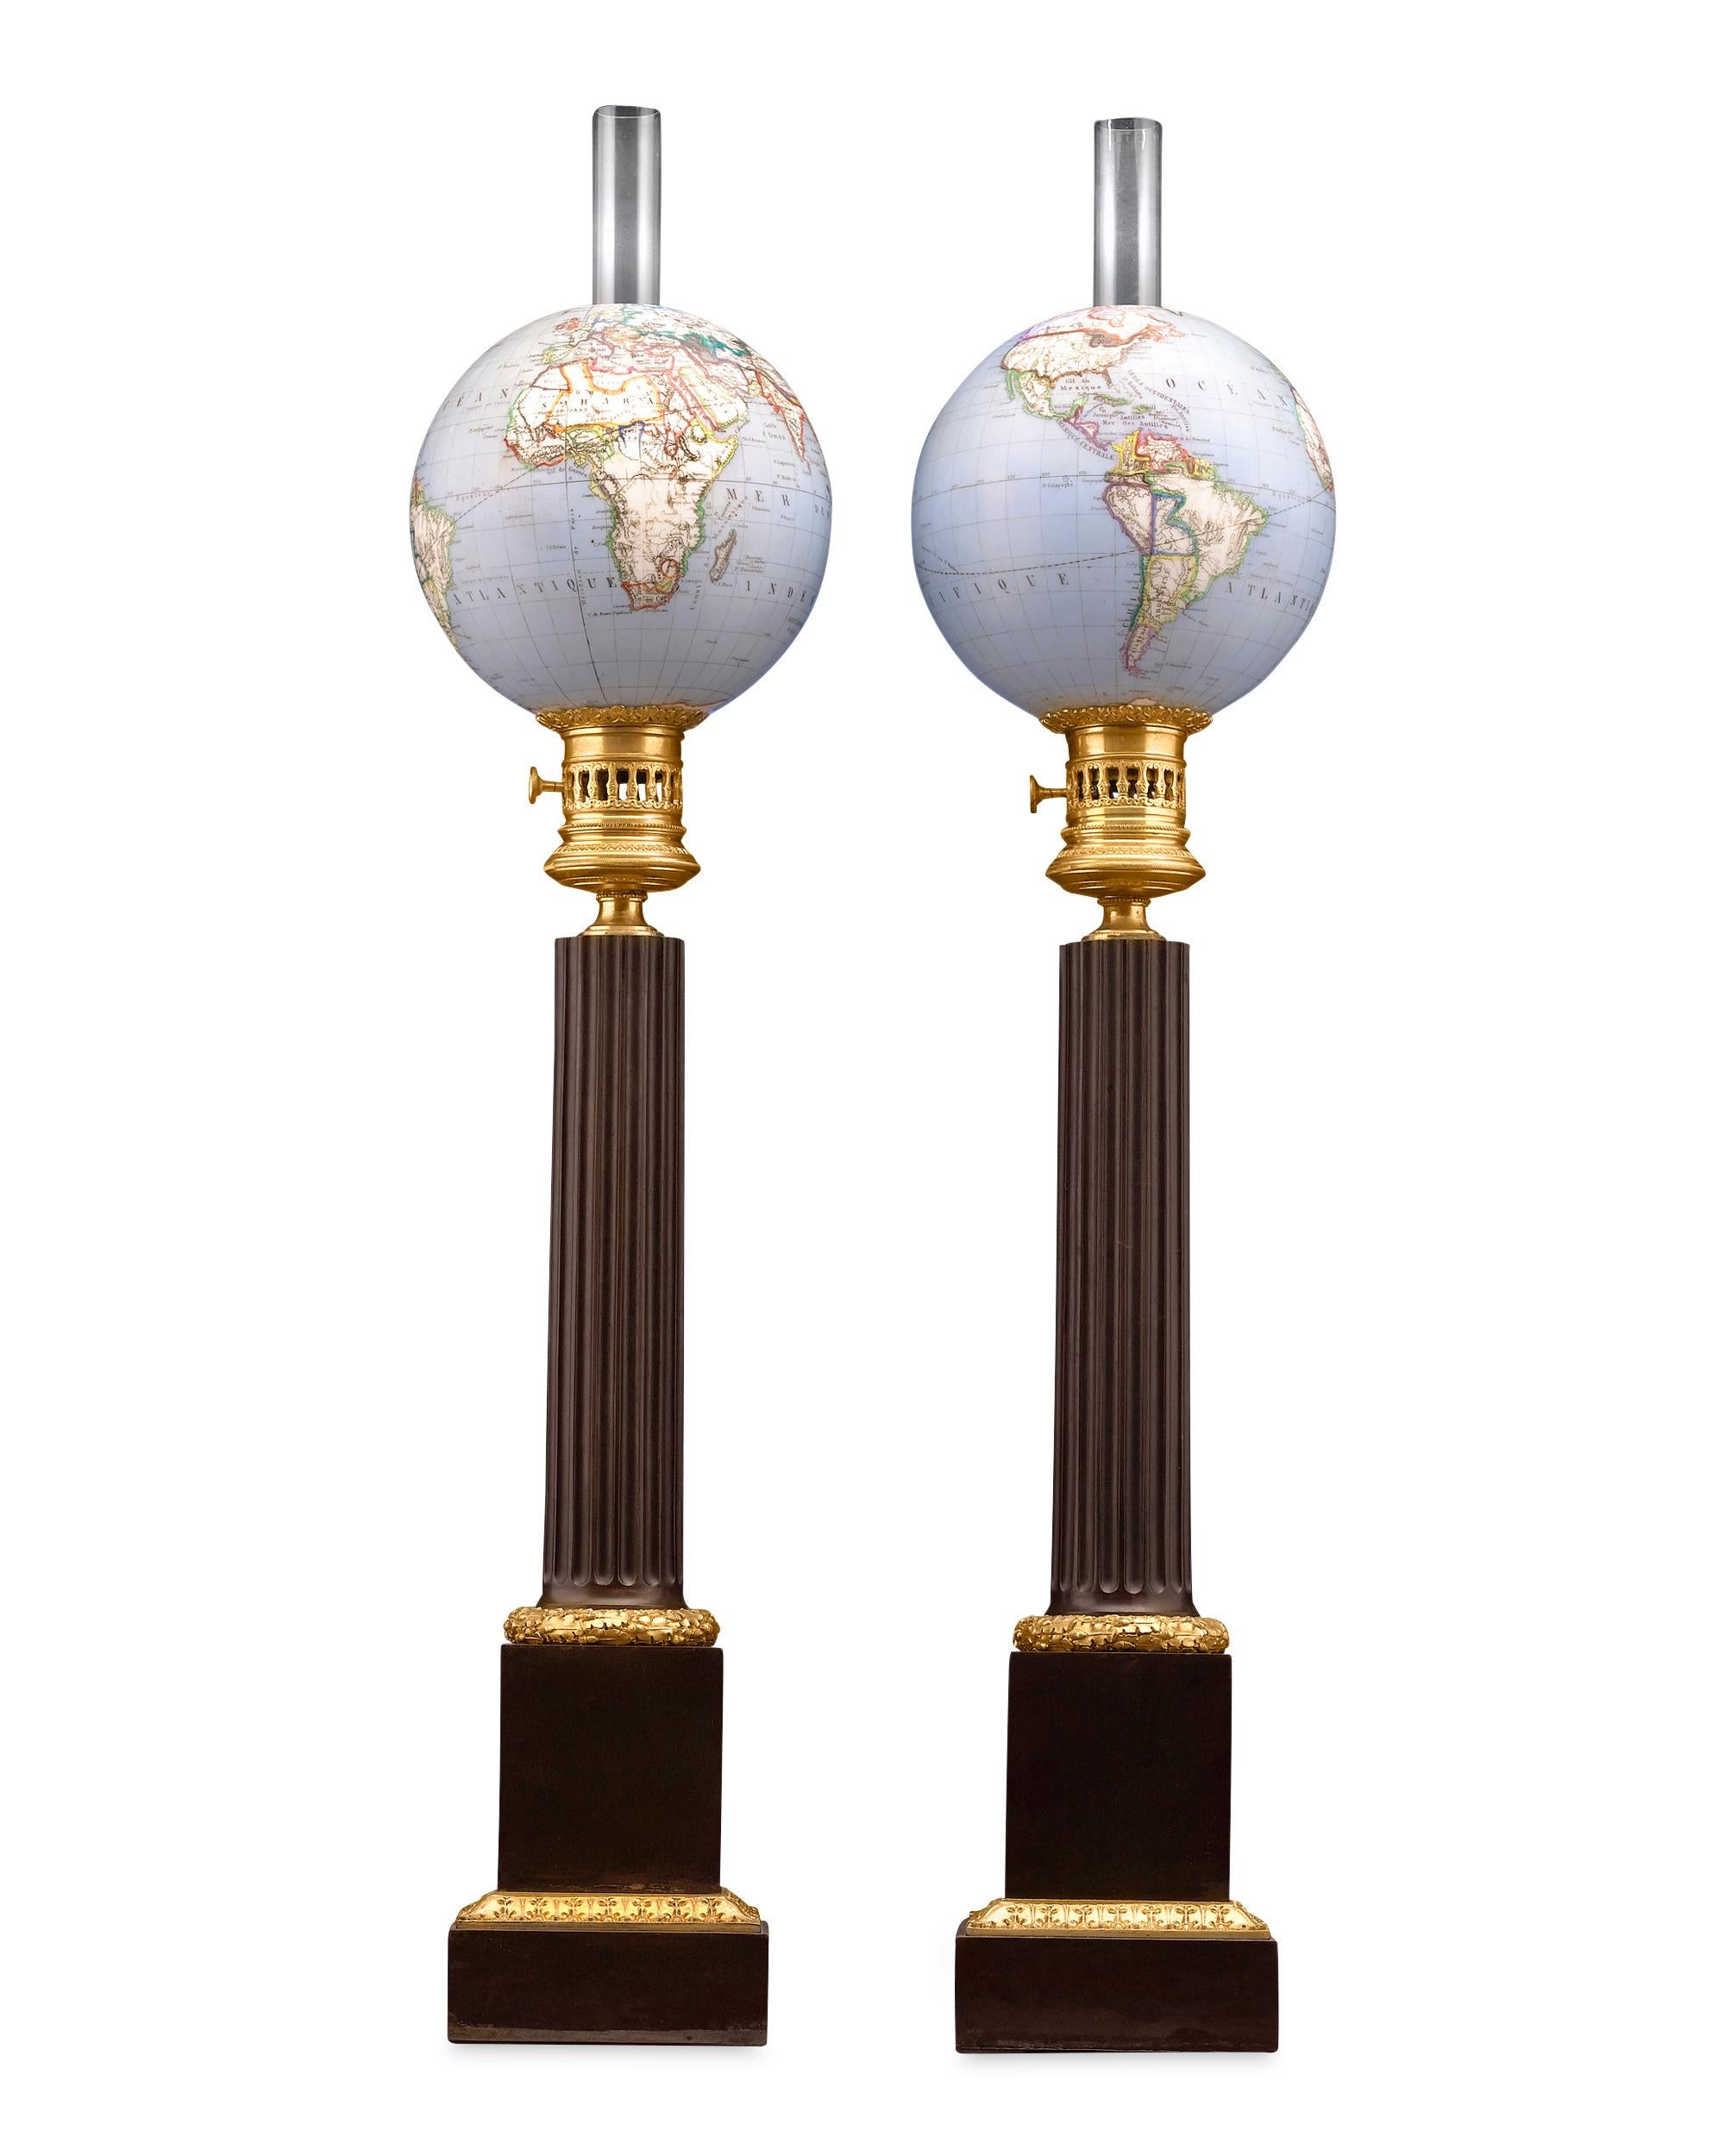 Astonishing translucent globes glow as lampshades in this rare and remarkable pair of French opaline oil lamps. The intricately crafted glass globes are simply radiant atop bases of beautifully crafted patinated and ormolu bronze in these Napoleon